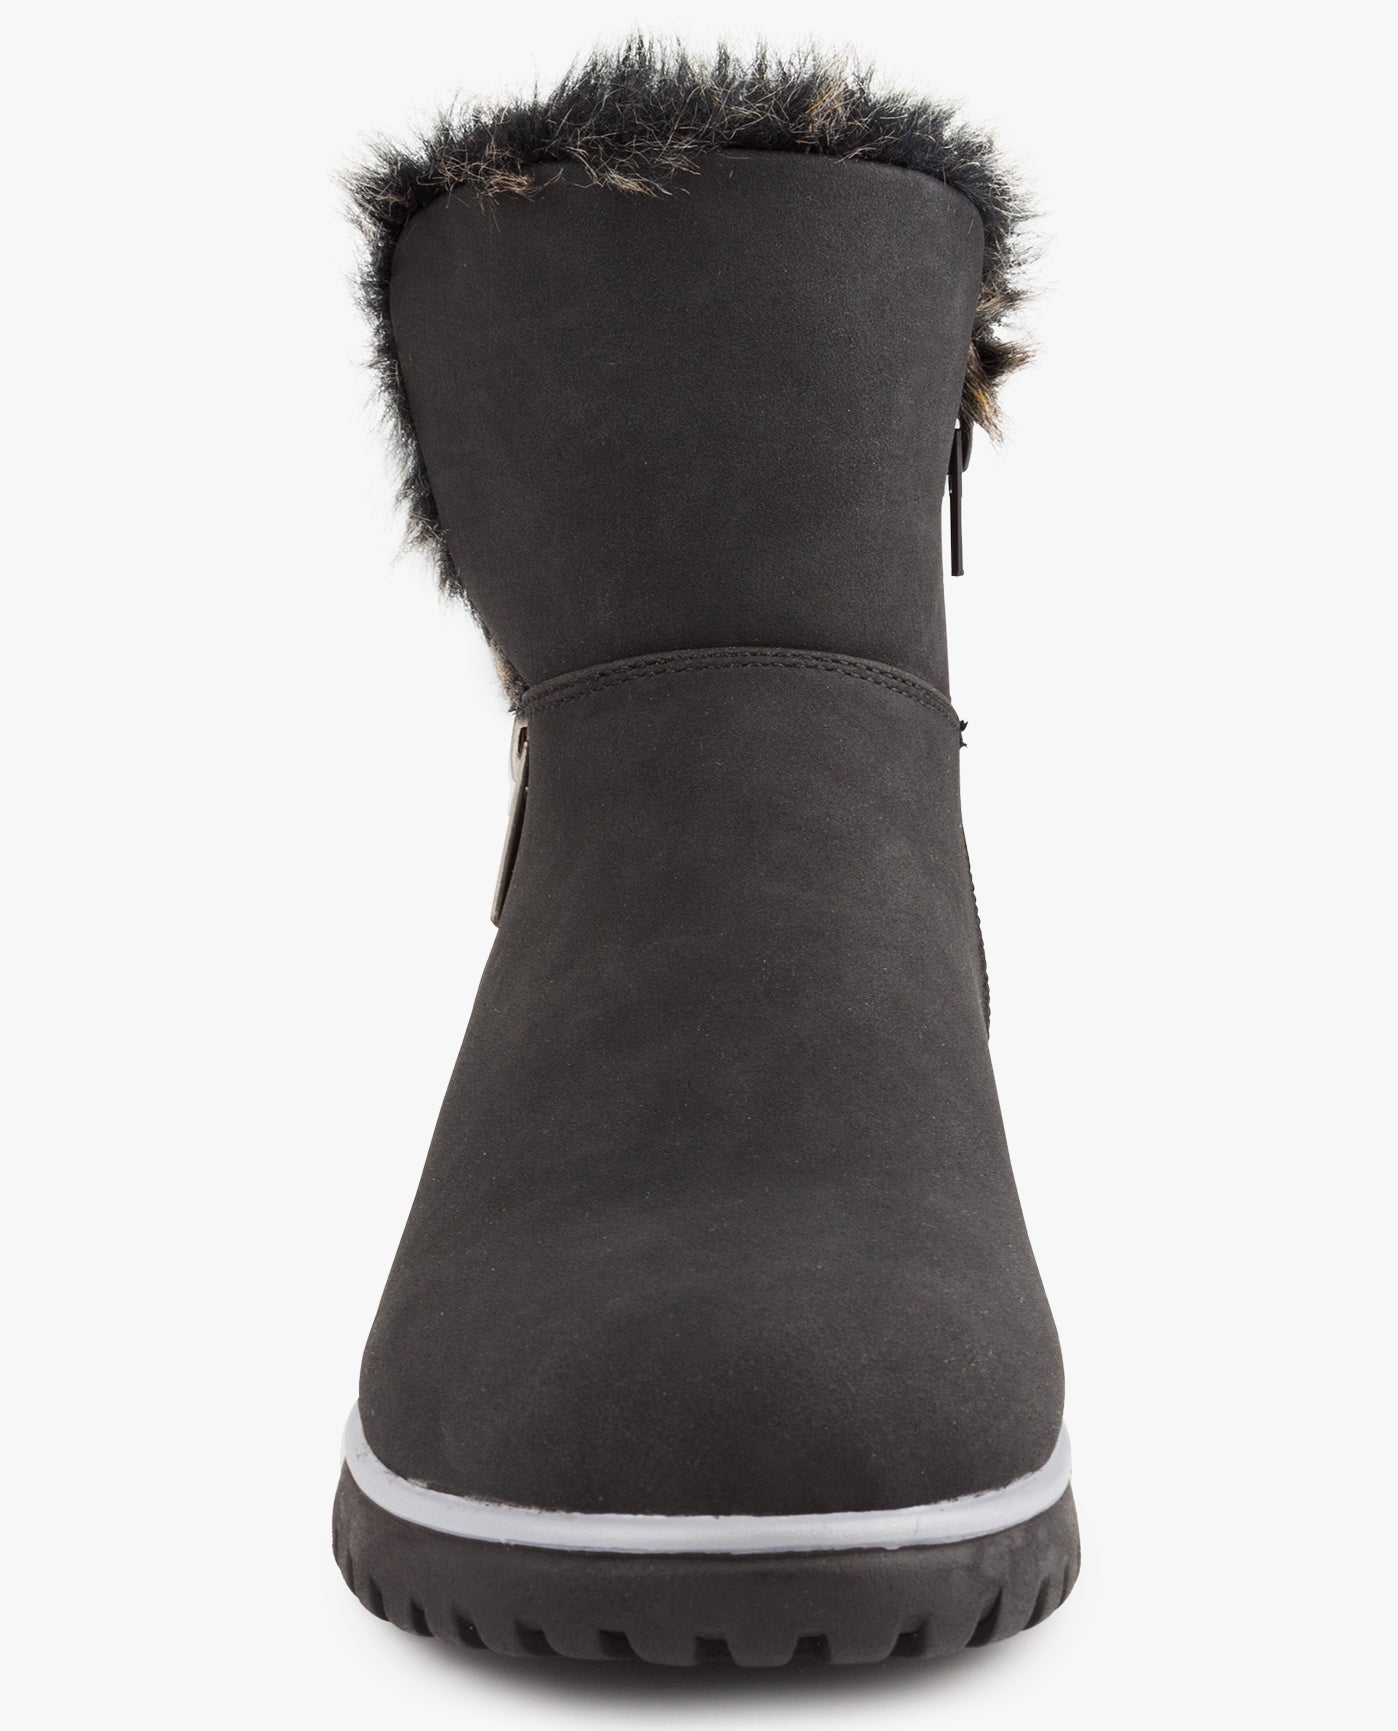 FRONT VIEW  OF WOMENS WHITEOUT WINTER BOOT | ESO_BLACK_001